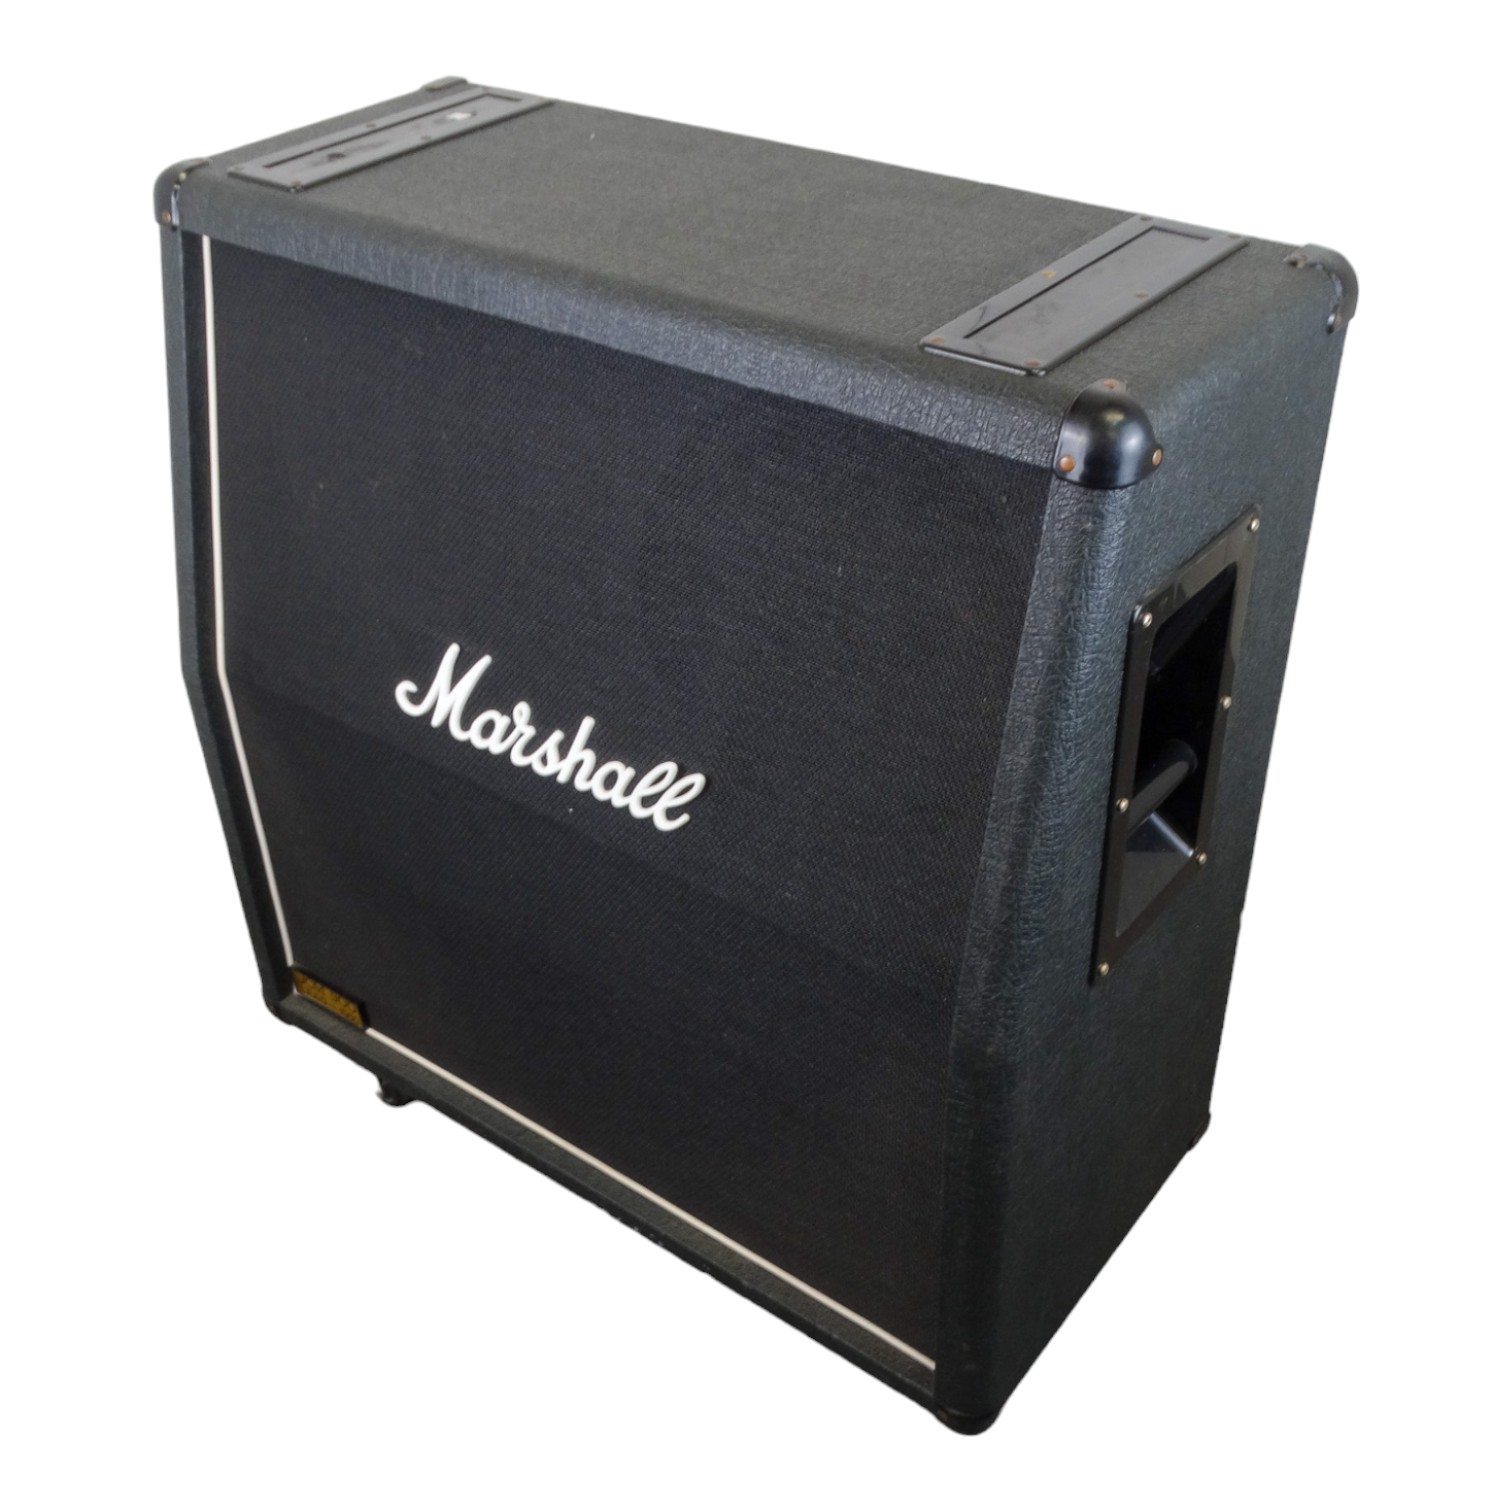 A Marshall lead amplifier speaker - JMC 900, circa 1990's in a re-issue '60's style. - Image 4 of 7